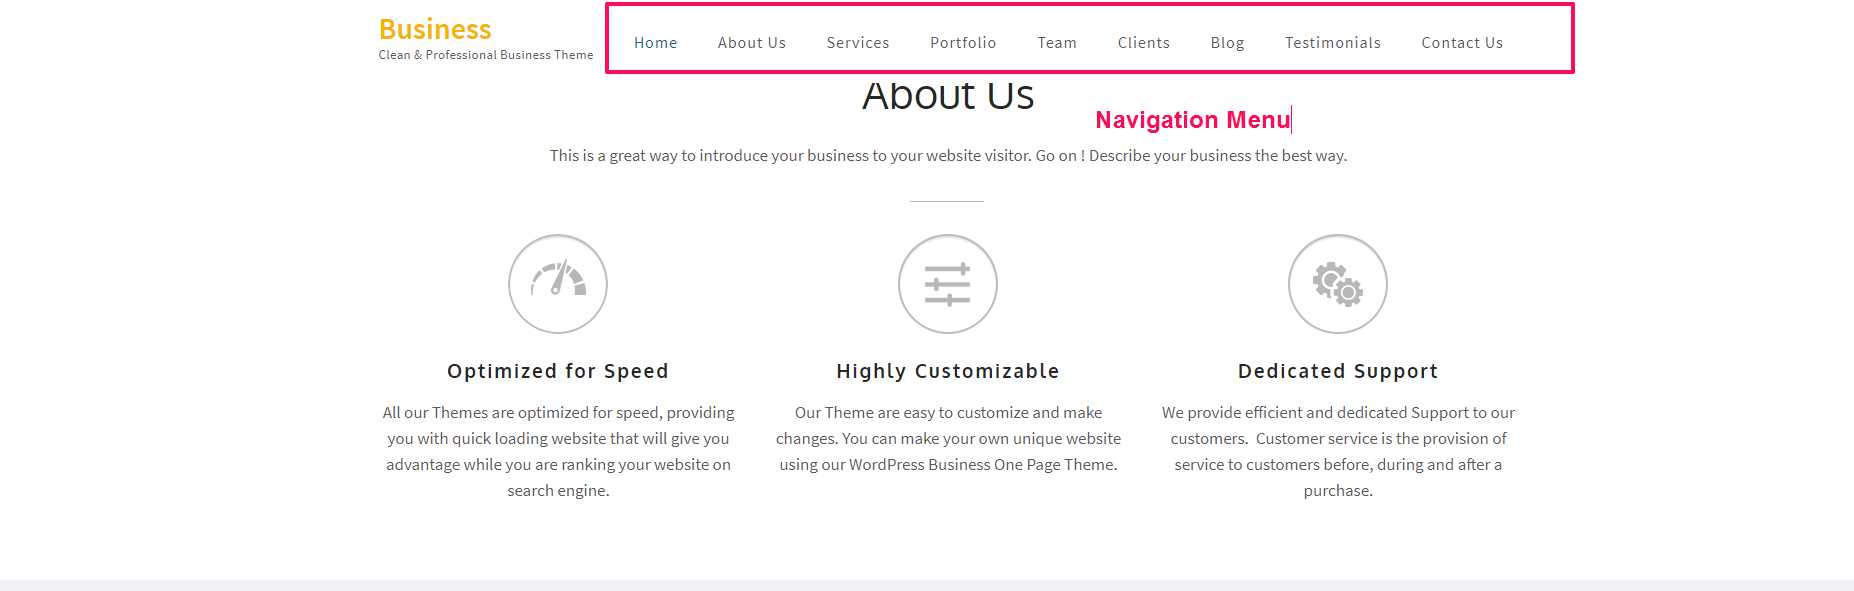 navigation menu for business one page